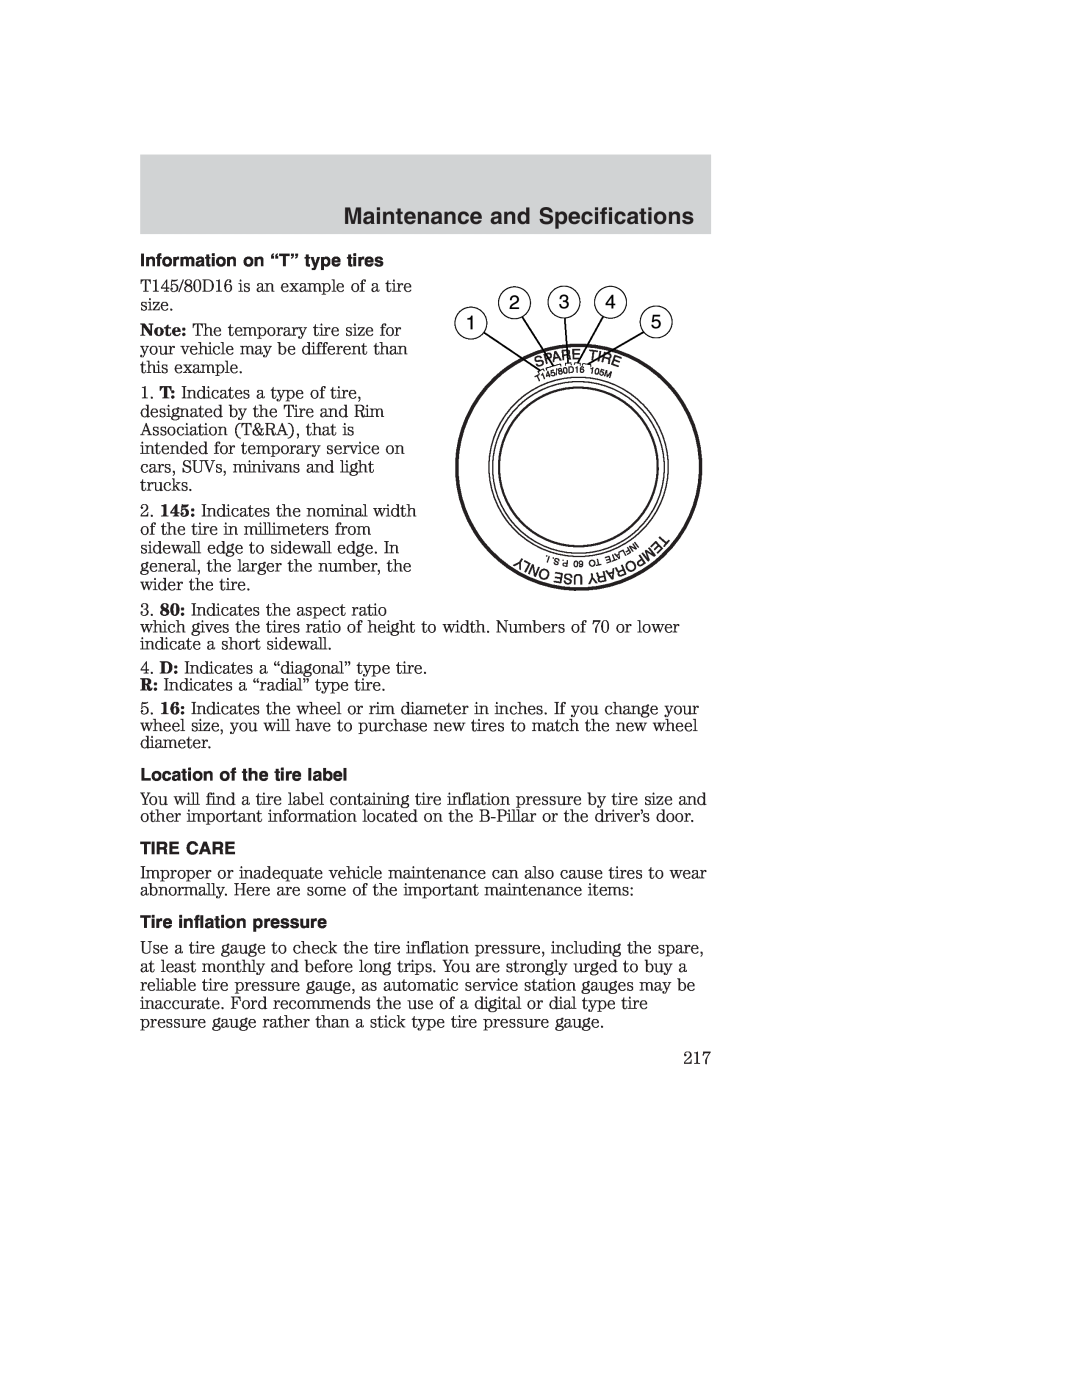 Ford AM/FM stereo manual Information on “T” type tires, Location of the tire label, Tire Care, Tire inflation pressure 